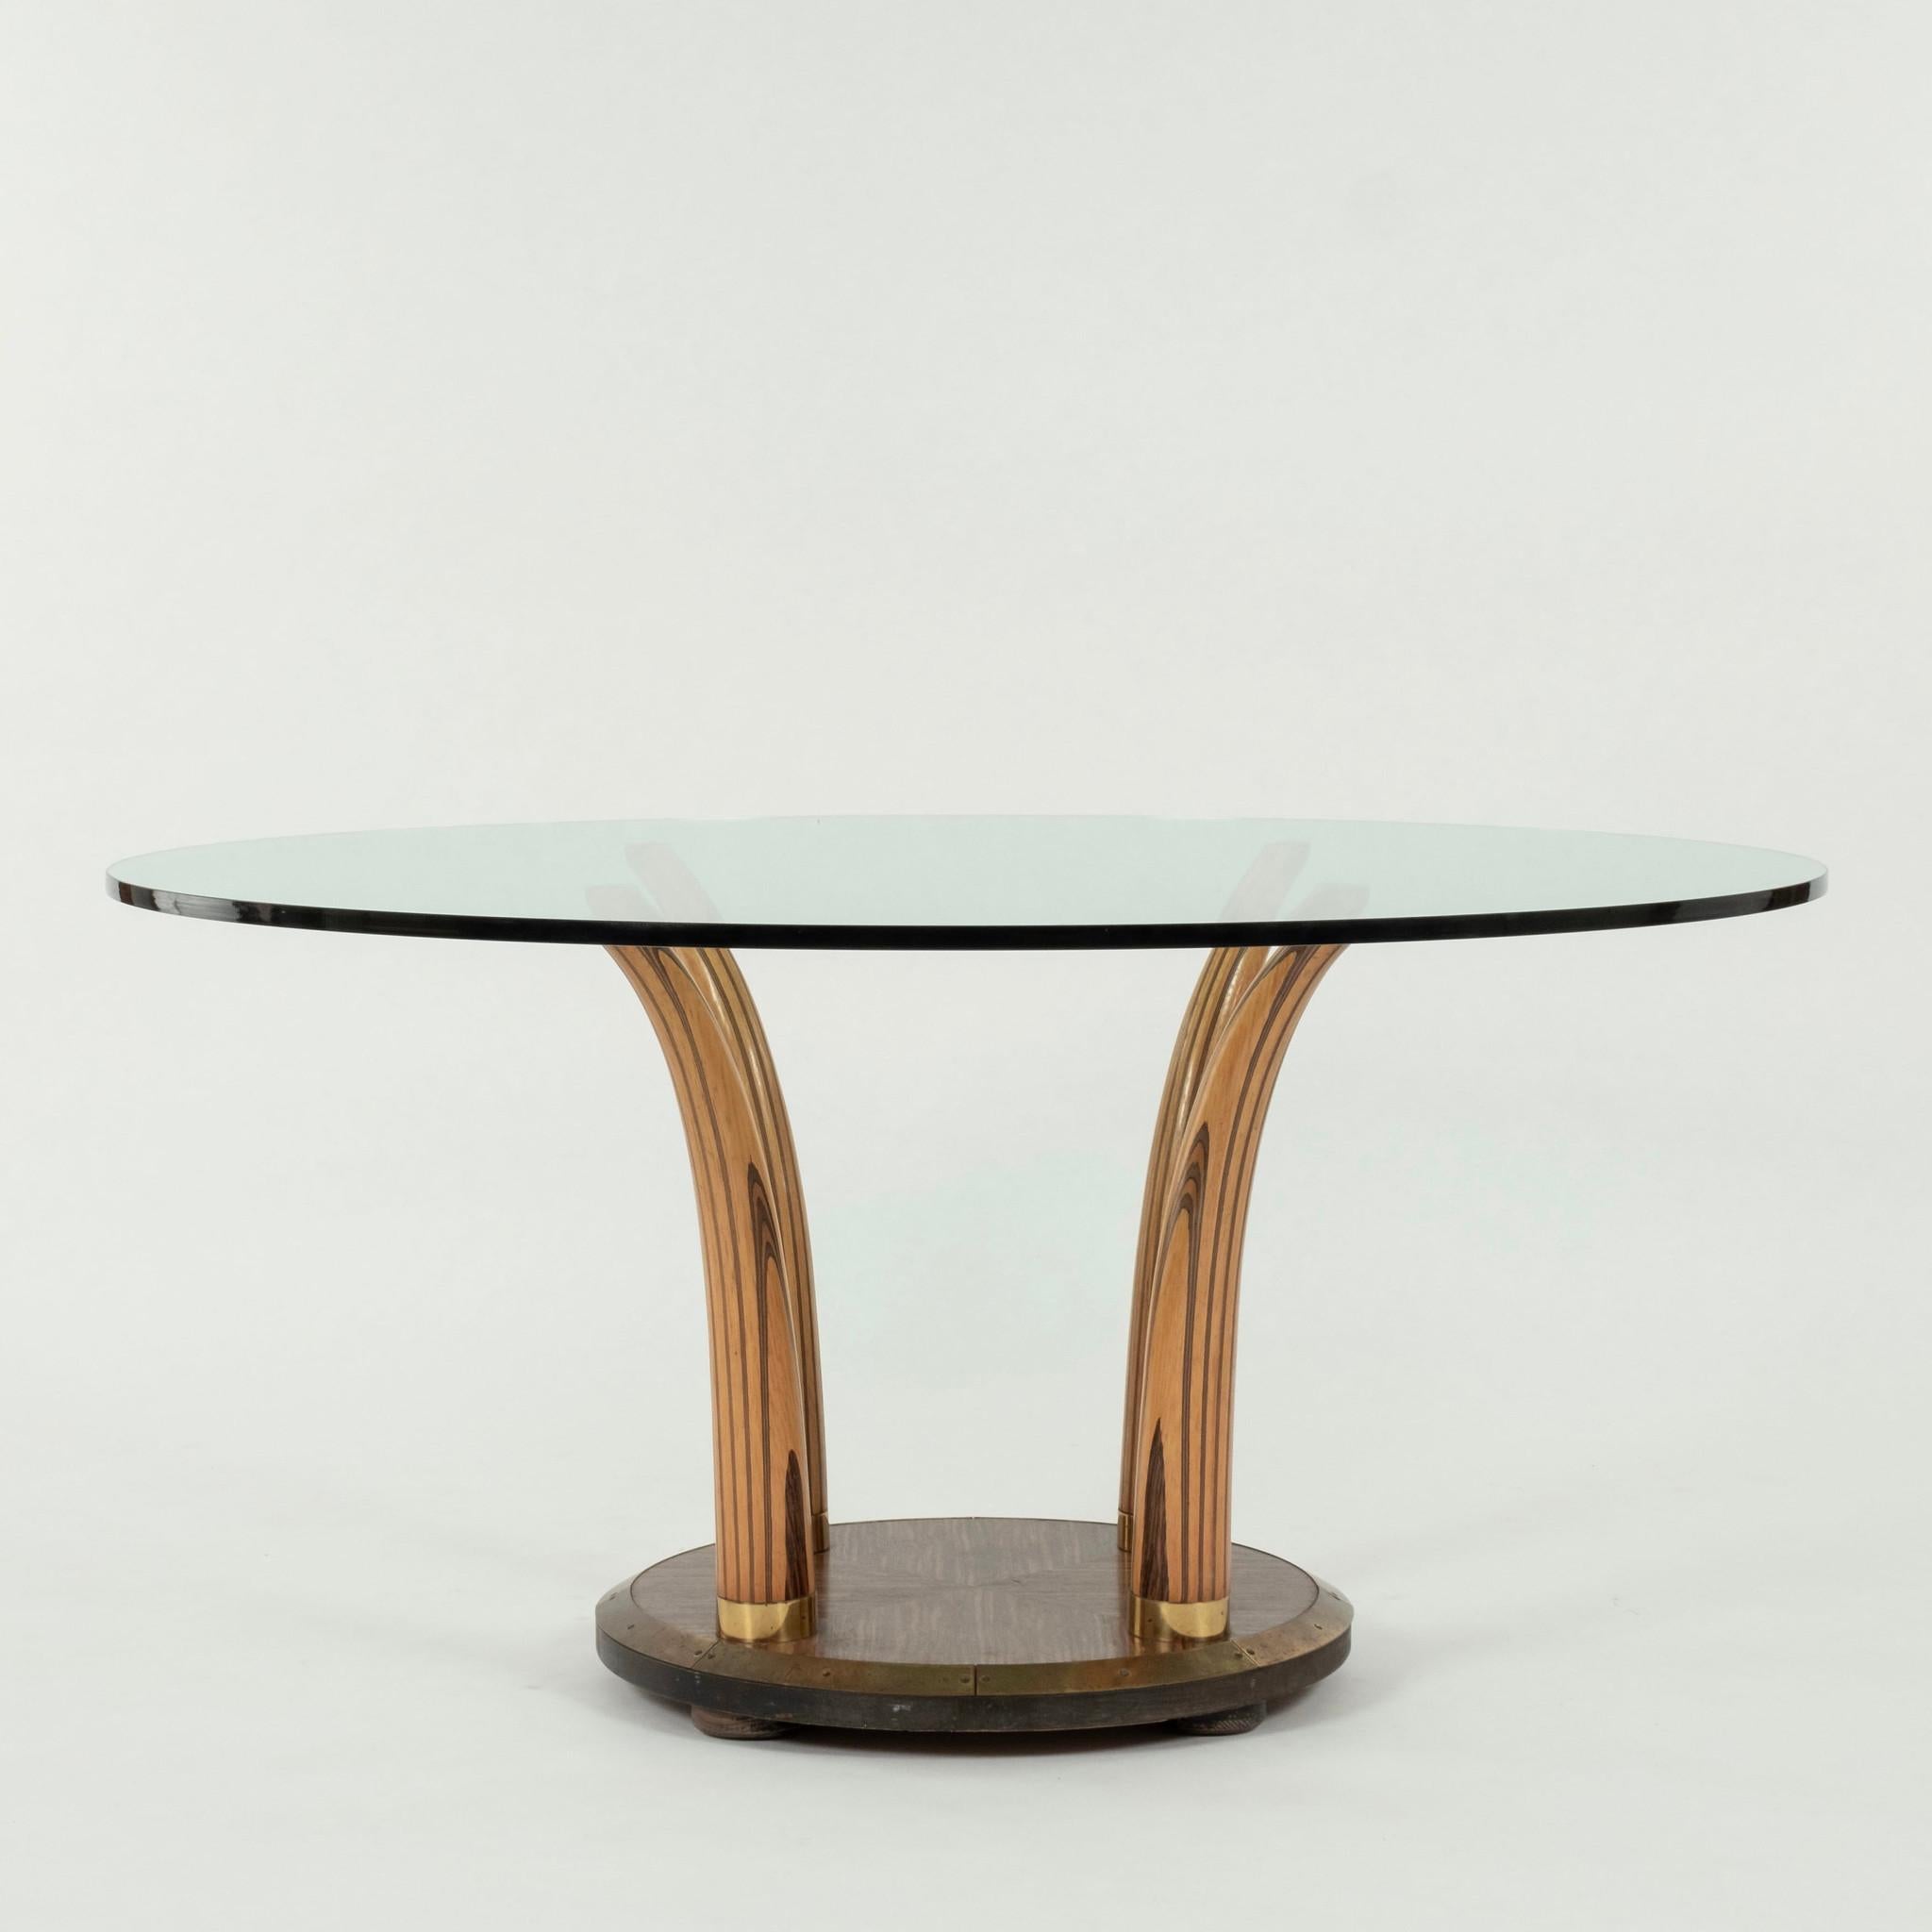 20th Century mixed zebra wood dining table: circular brass lined beveled base with four faux tusks supporting a 3/4